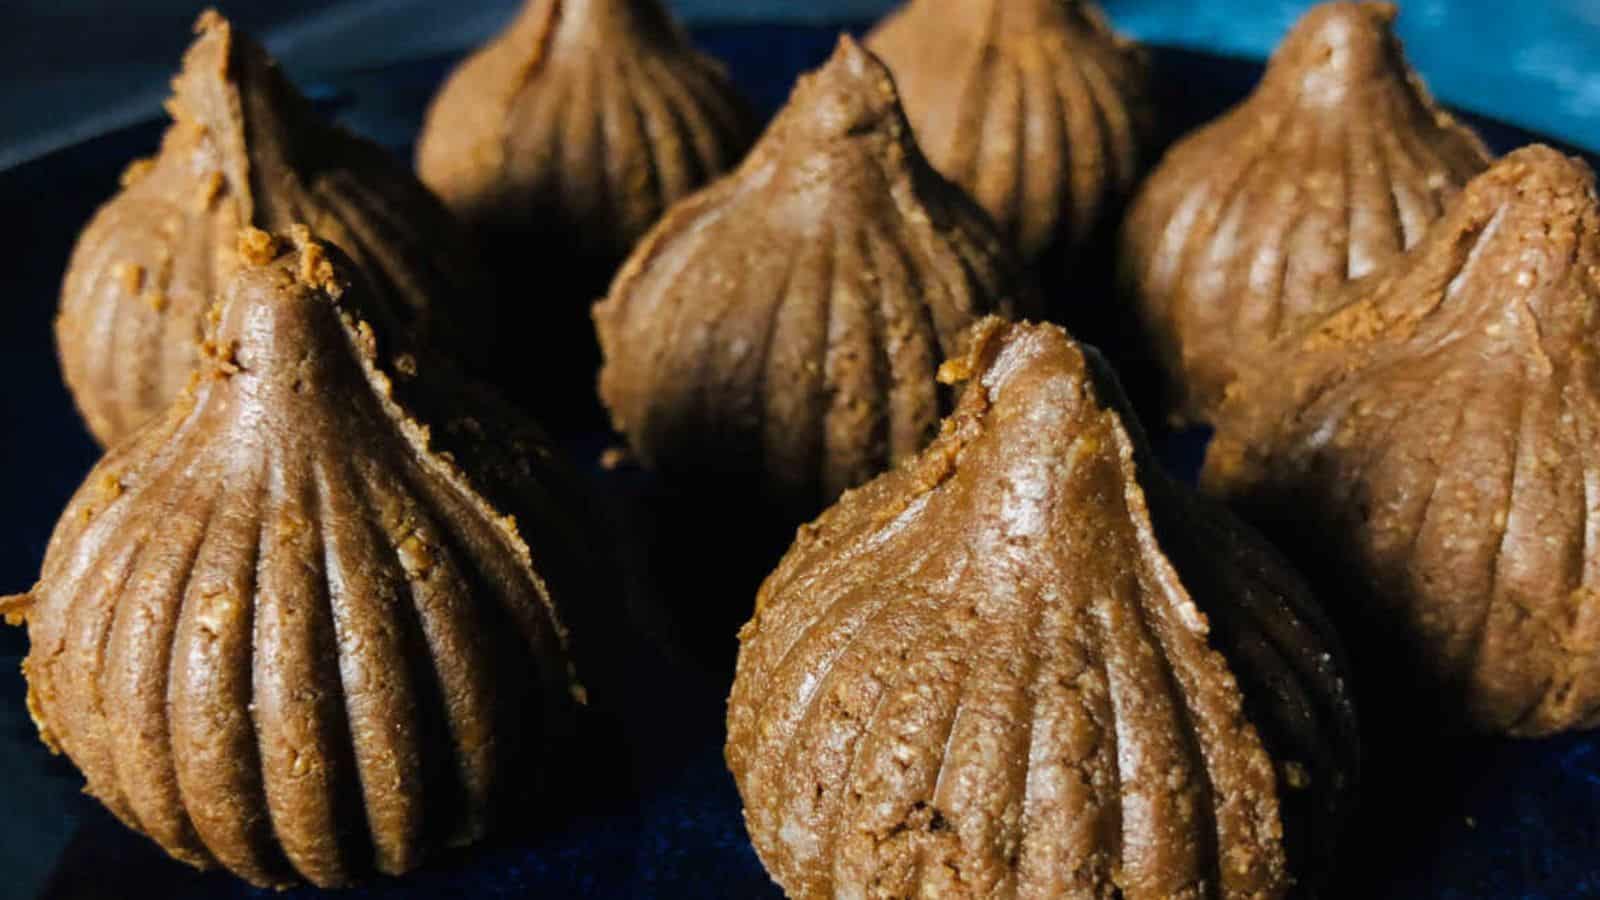 Close-up of eight modaks placed on a dark surface. These traditional Indian sweets have a ridged, conical shape and are made from brown dough.